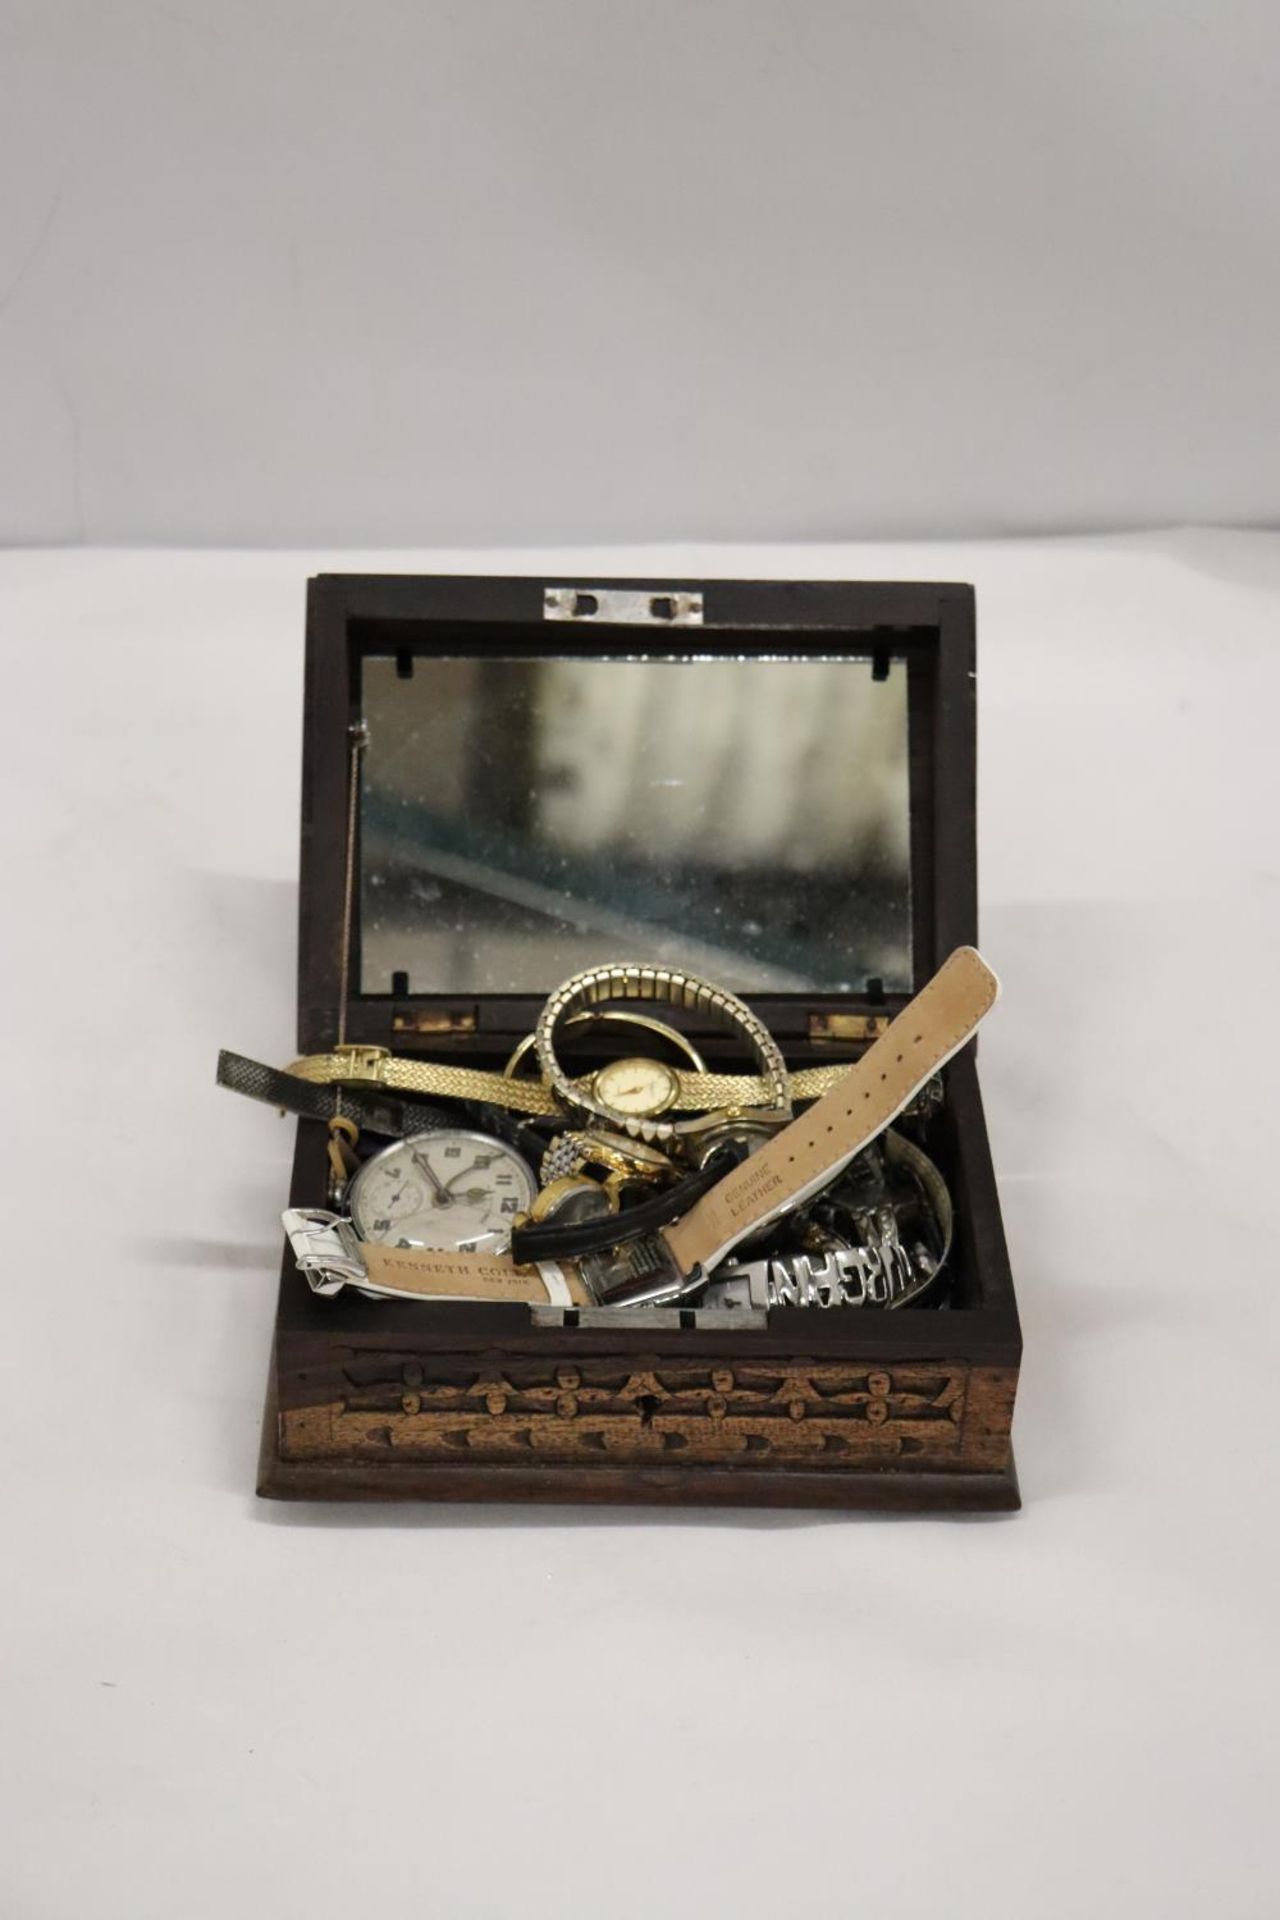 A QUANTITY OF WRISTWATCHES TO INCLUDE LIMIT - 8 IN TOTAL PLUS A CARVED WOODEN BOX WITH A QUANTITY OF